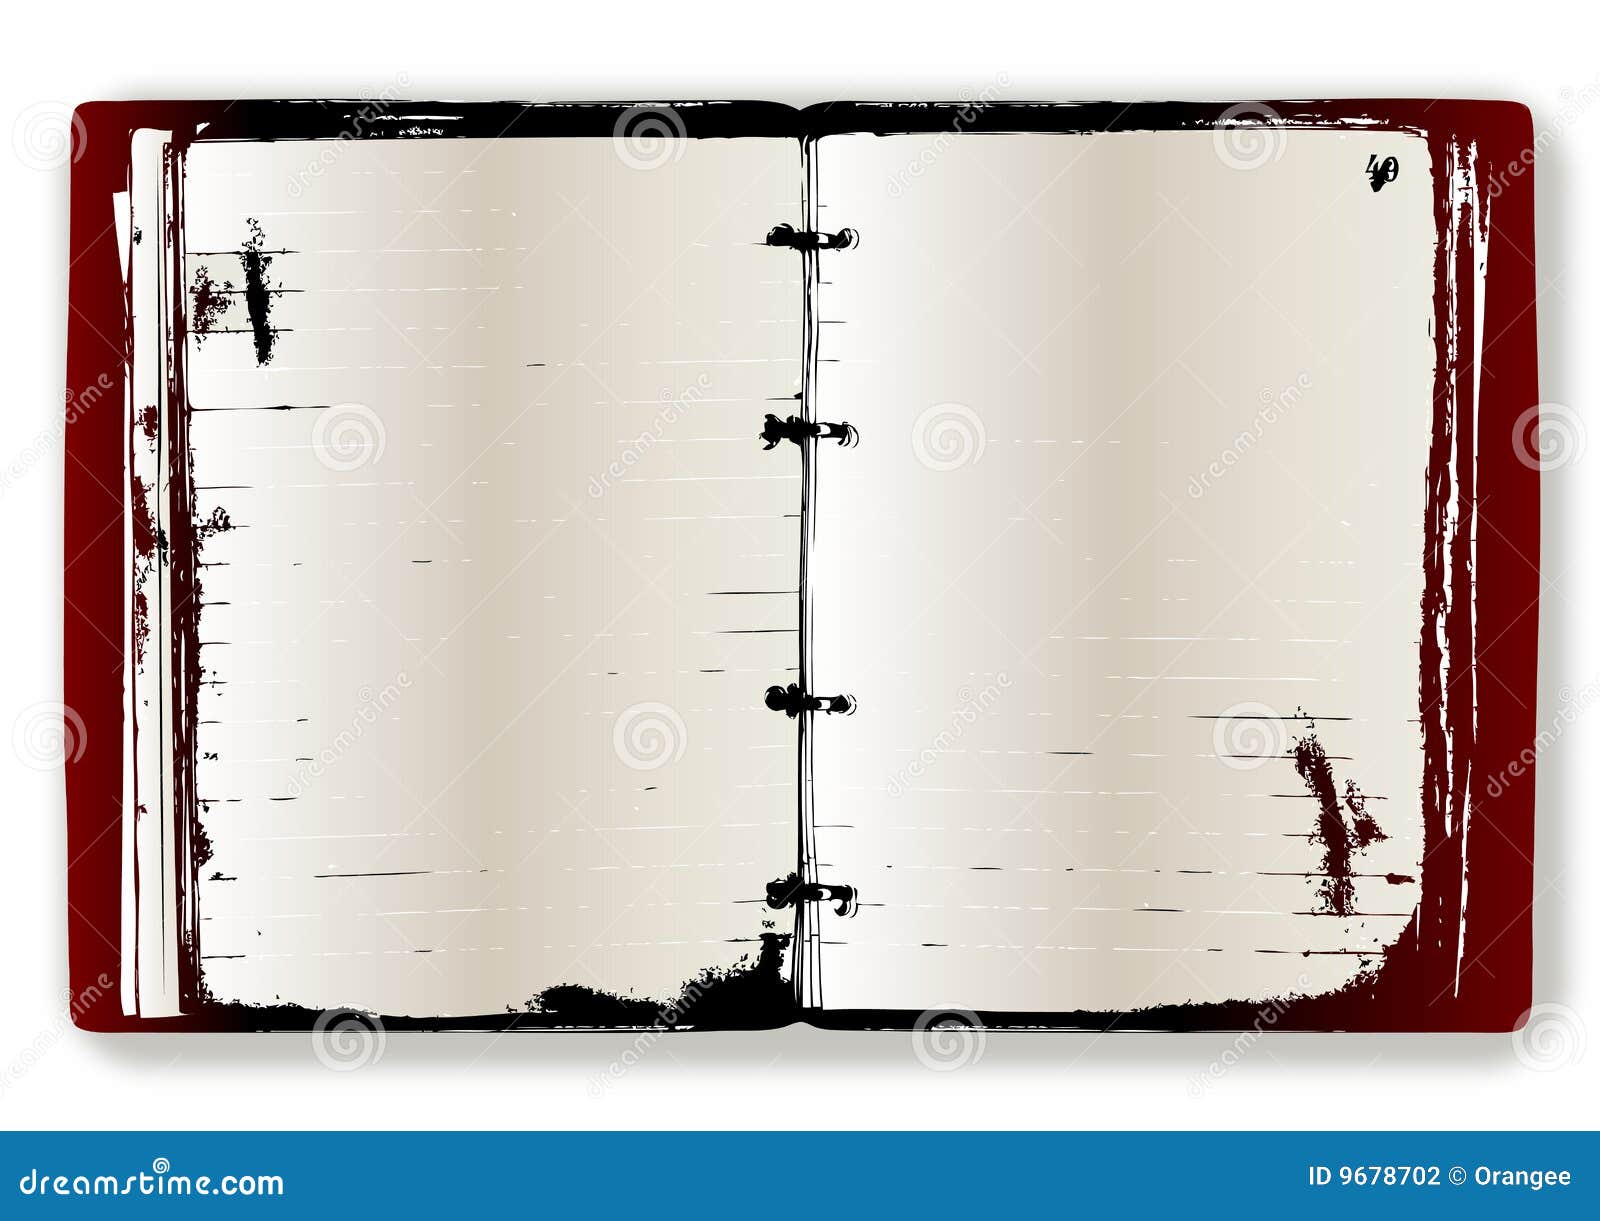 Illustrated rustic journal stock vector. Illustration of pages - 9678702